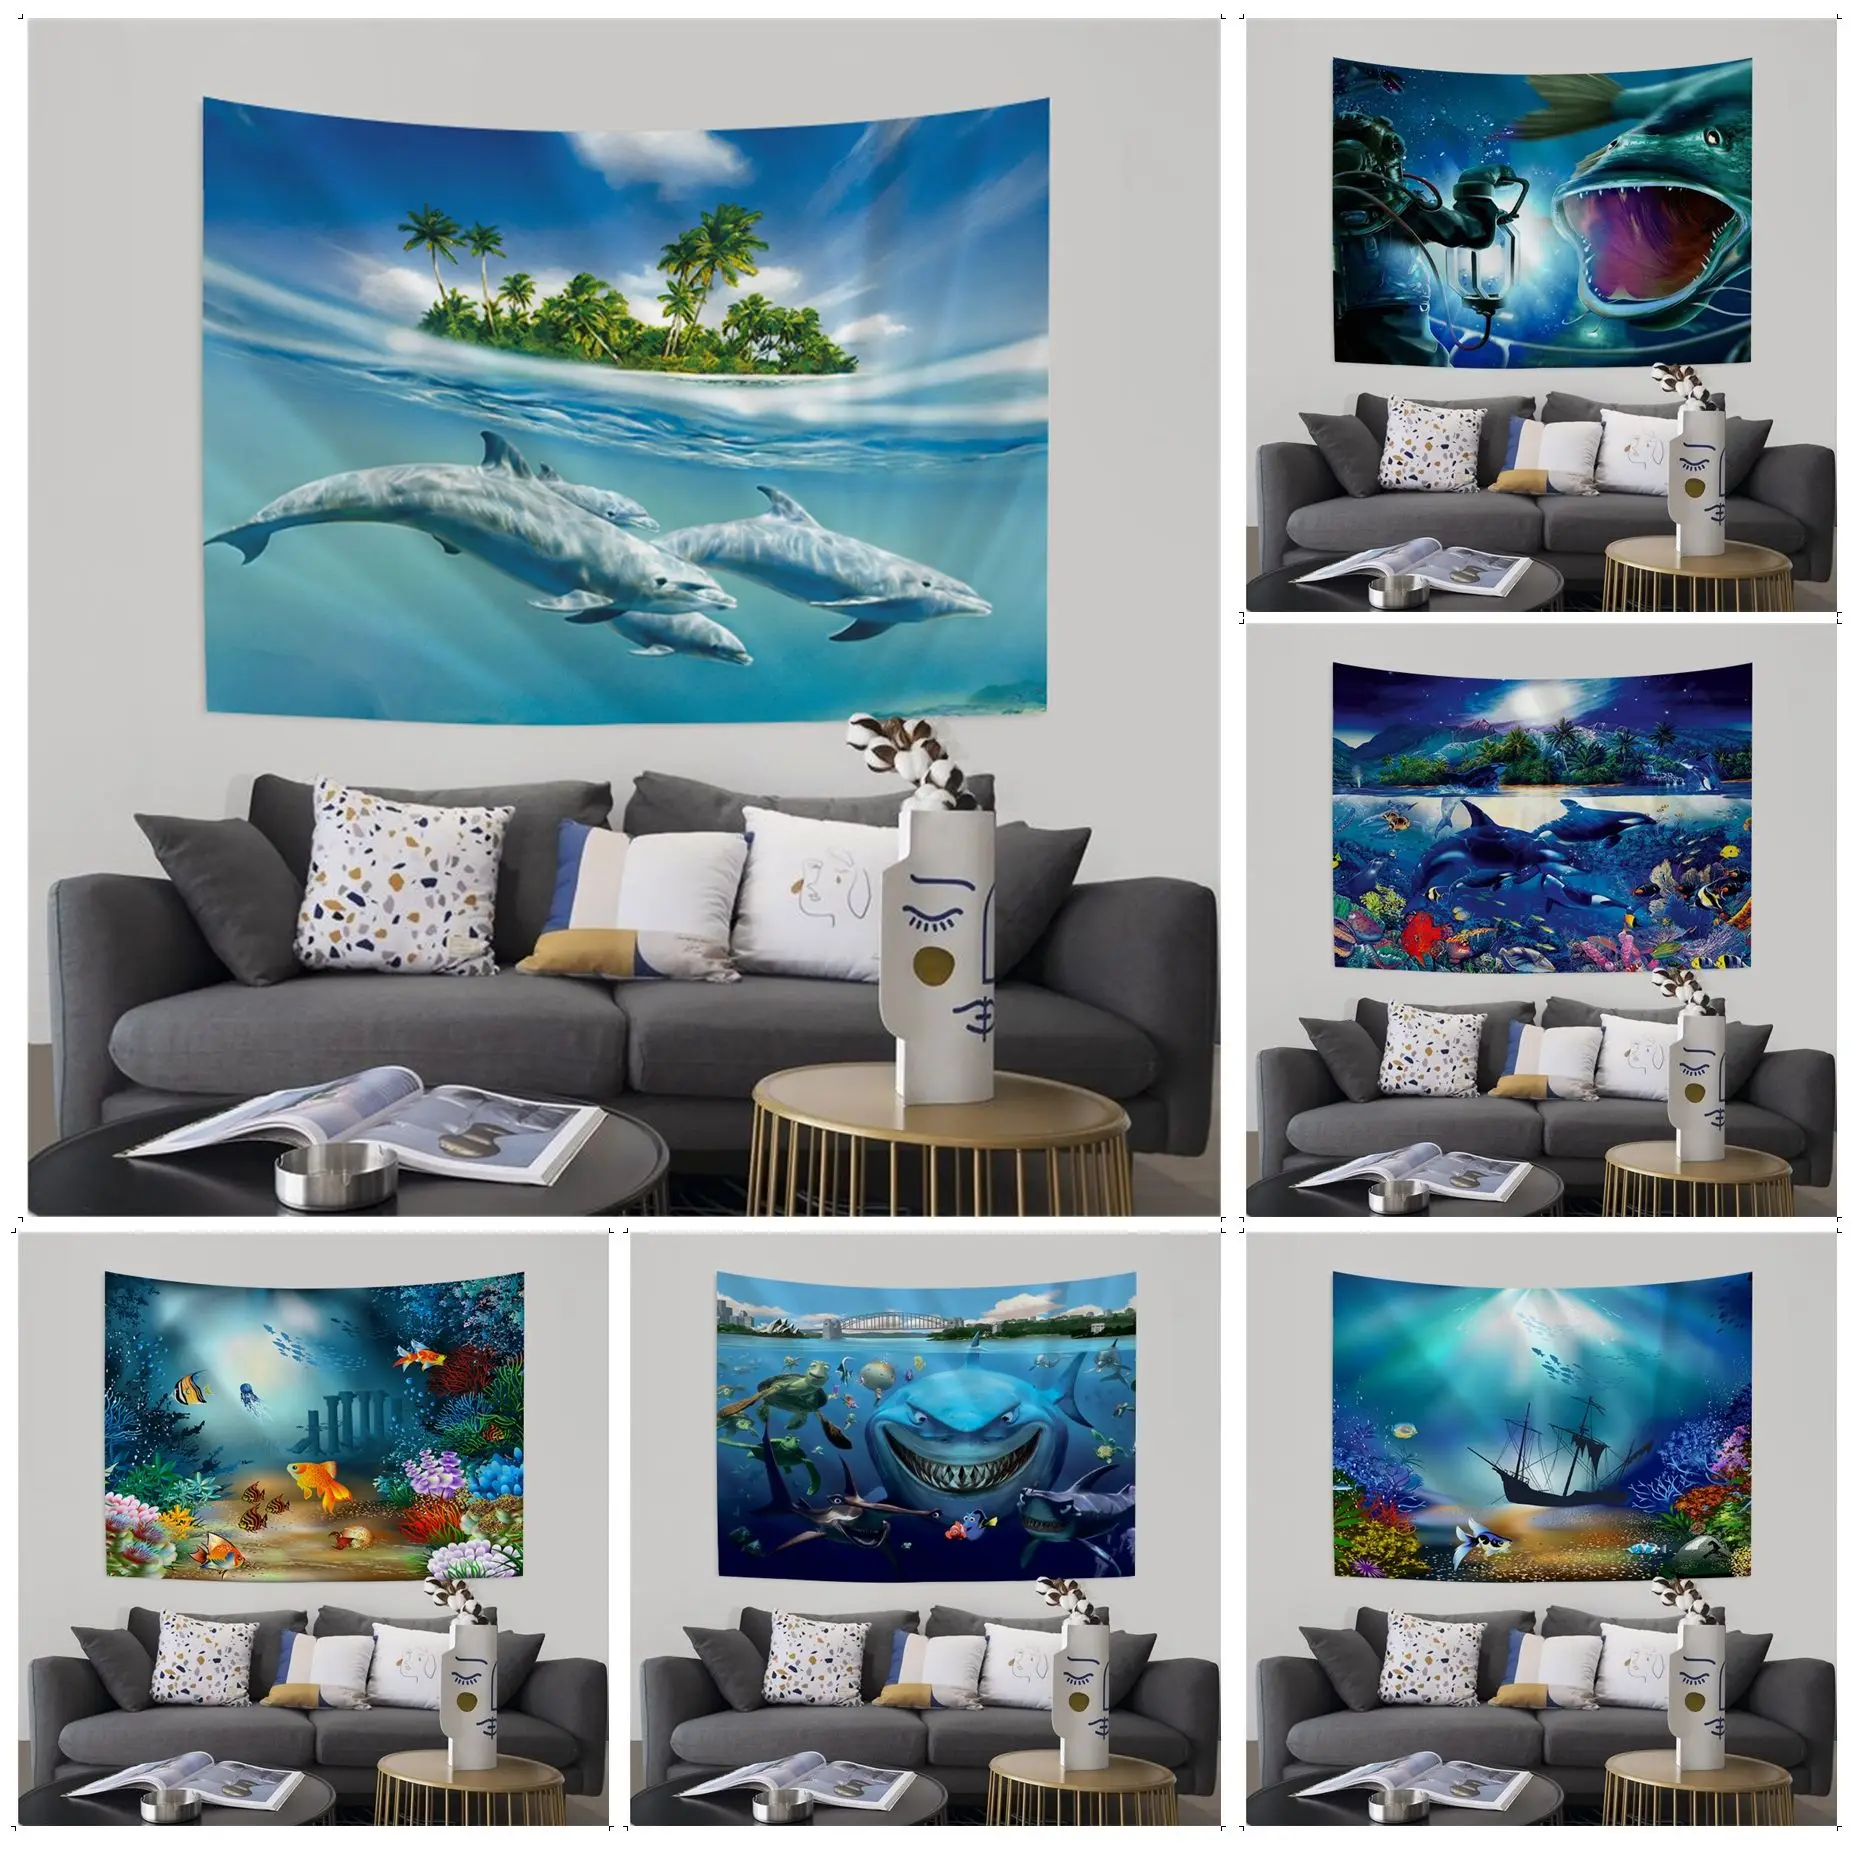 

dream scene underwater world Tapestry Art Printing Indian Buddha Wall Decoration Witchcraft Bohemian Hippie Wall Hanging Sheets